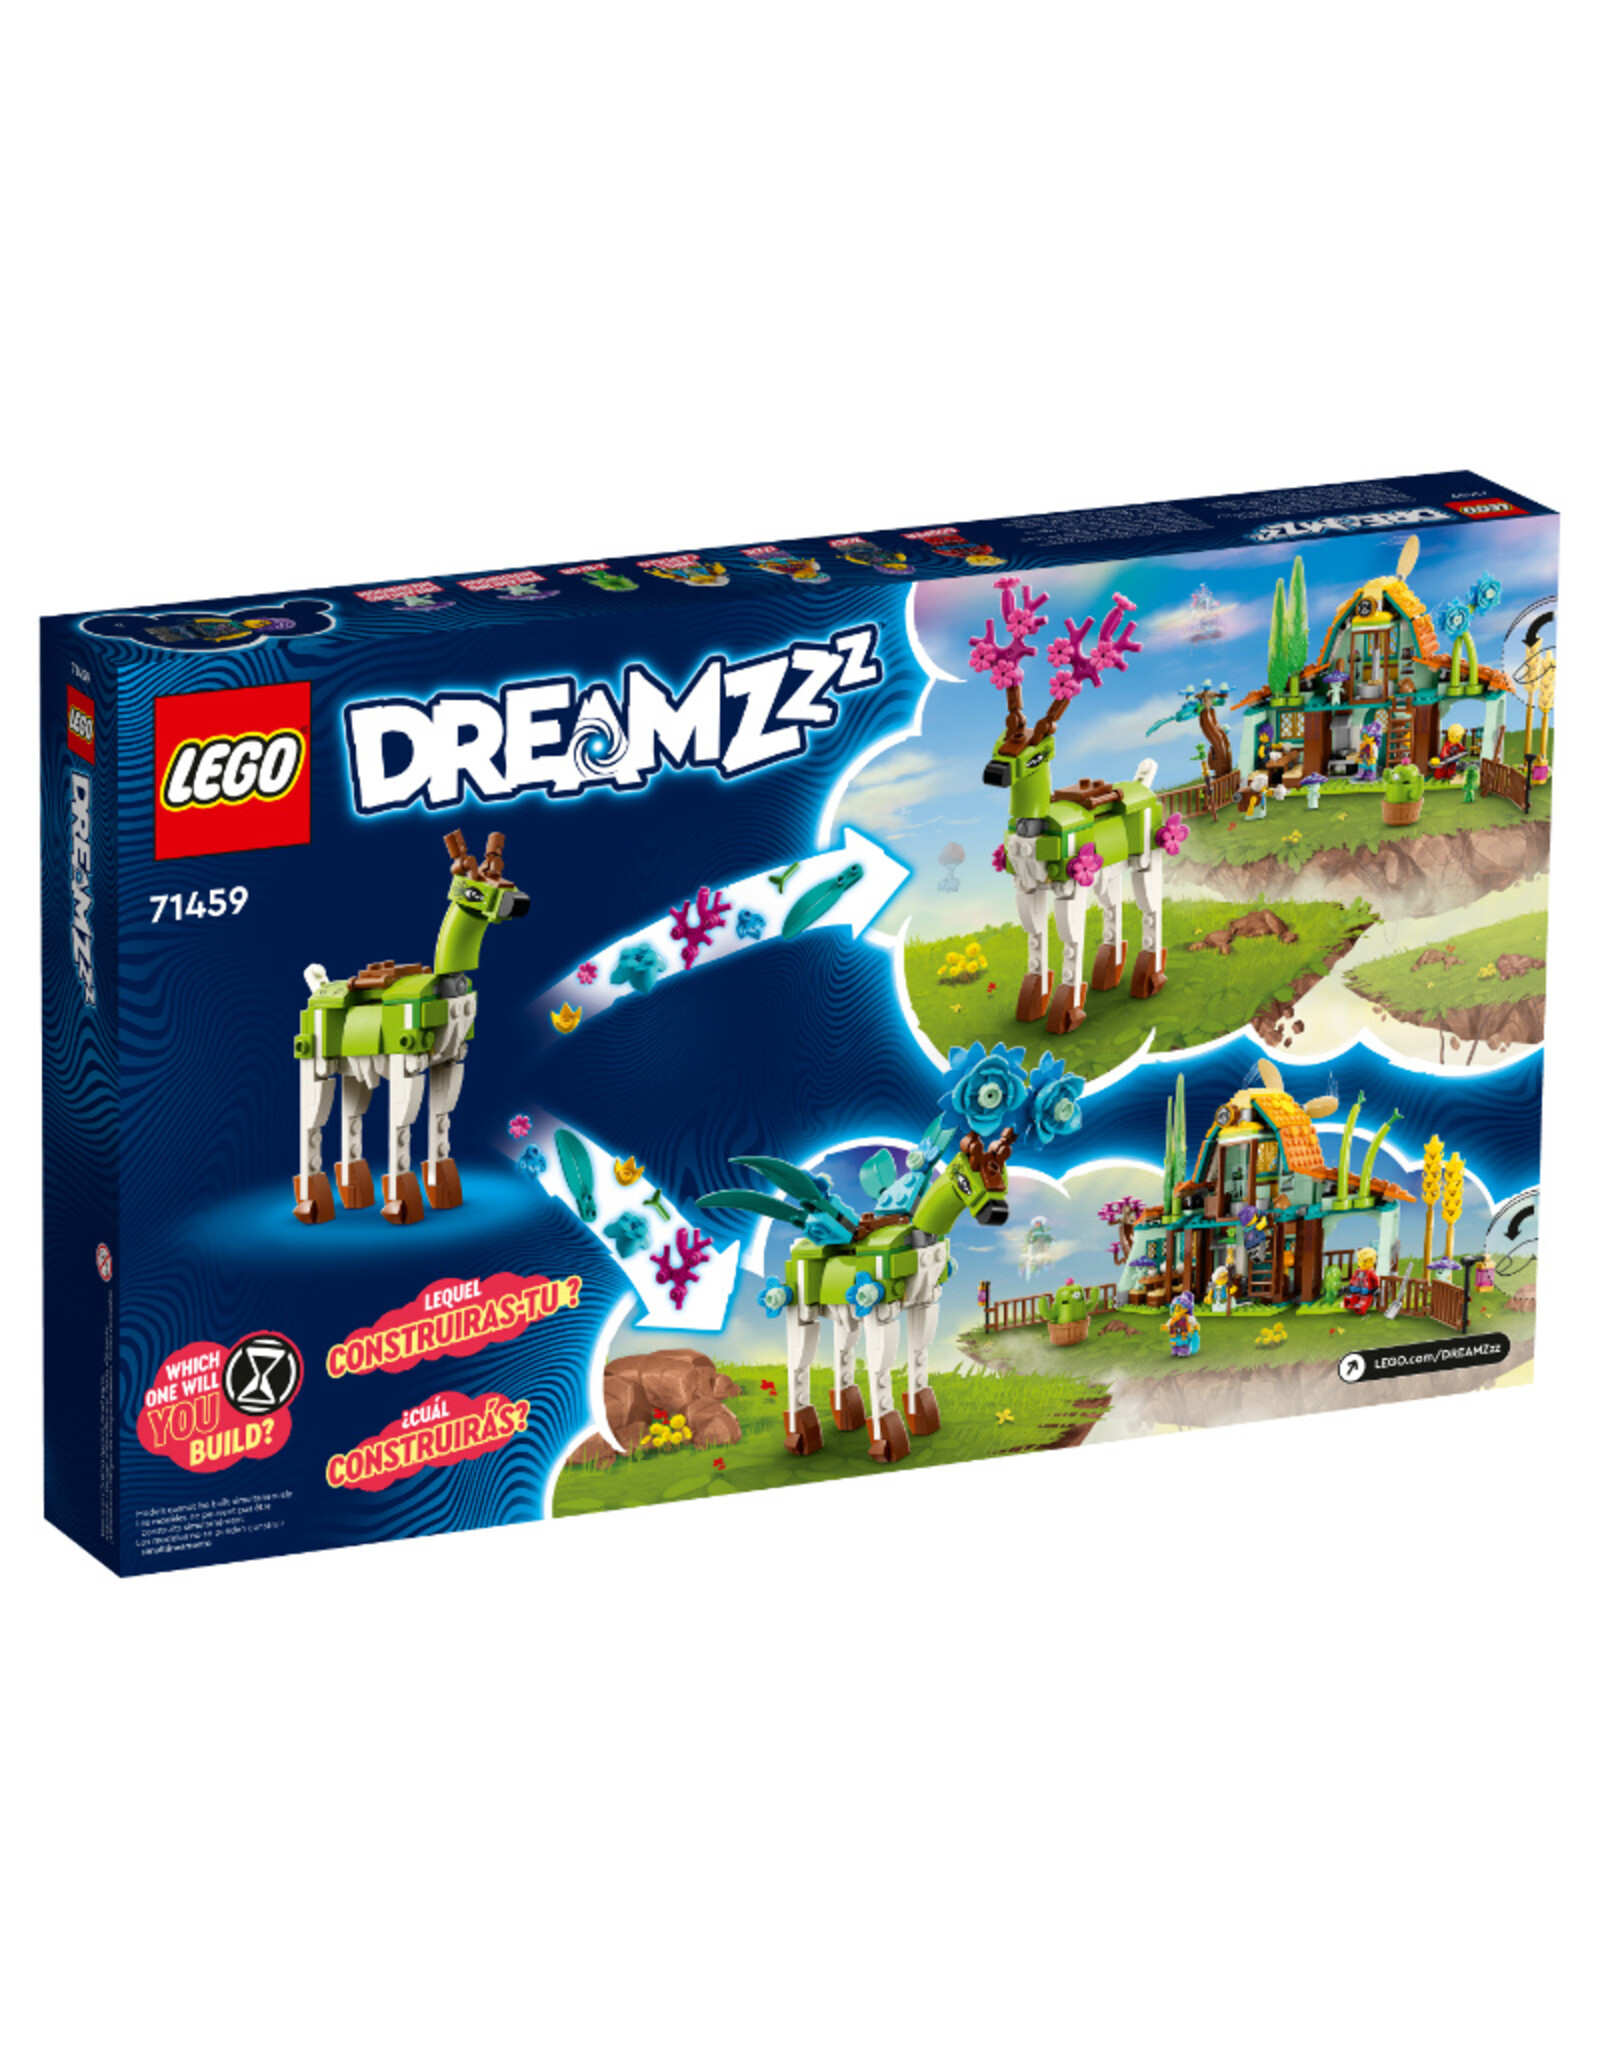 LEGO Dreamzzz 71459 Stable of Dream Creatures